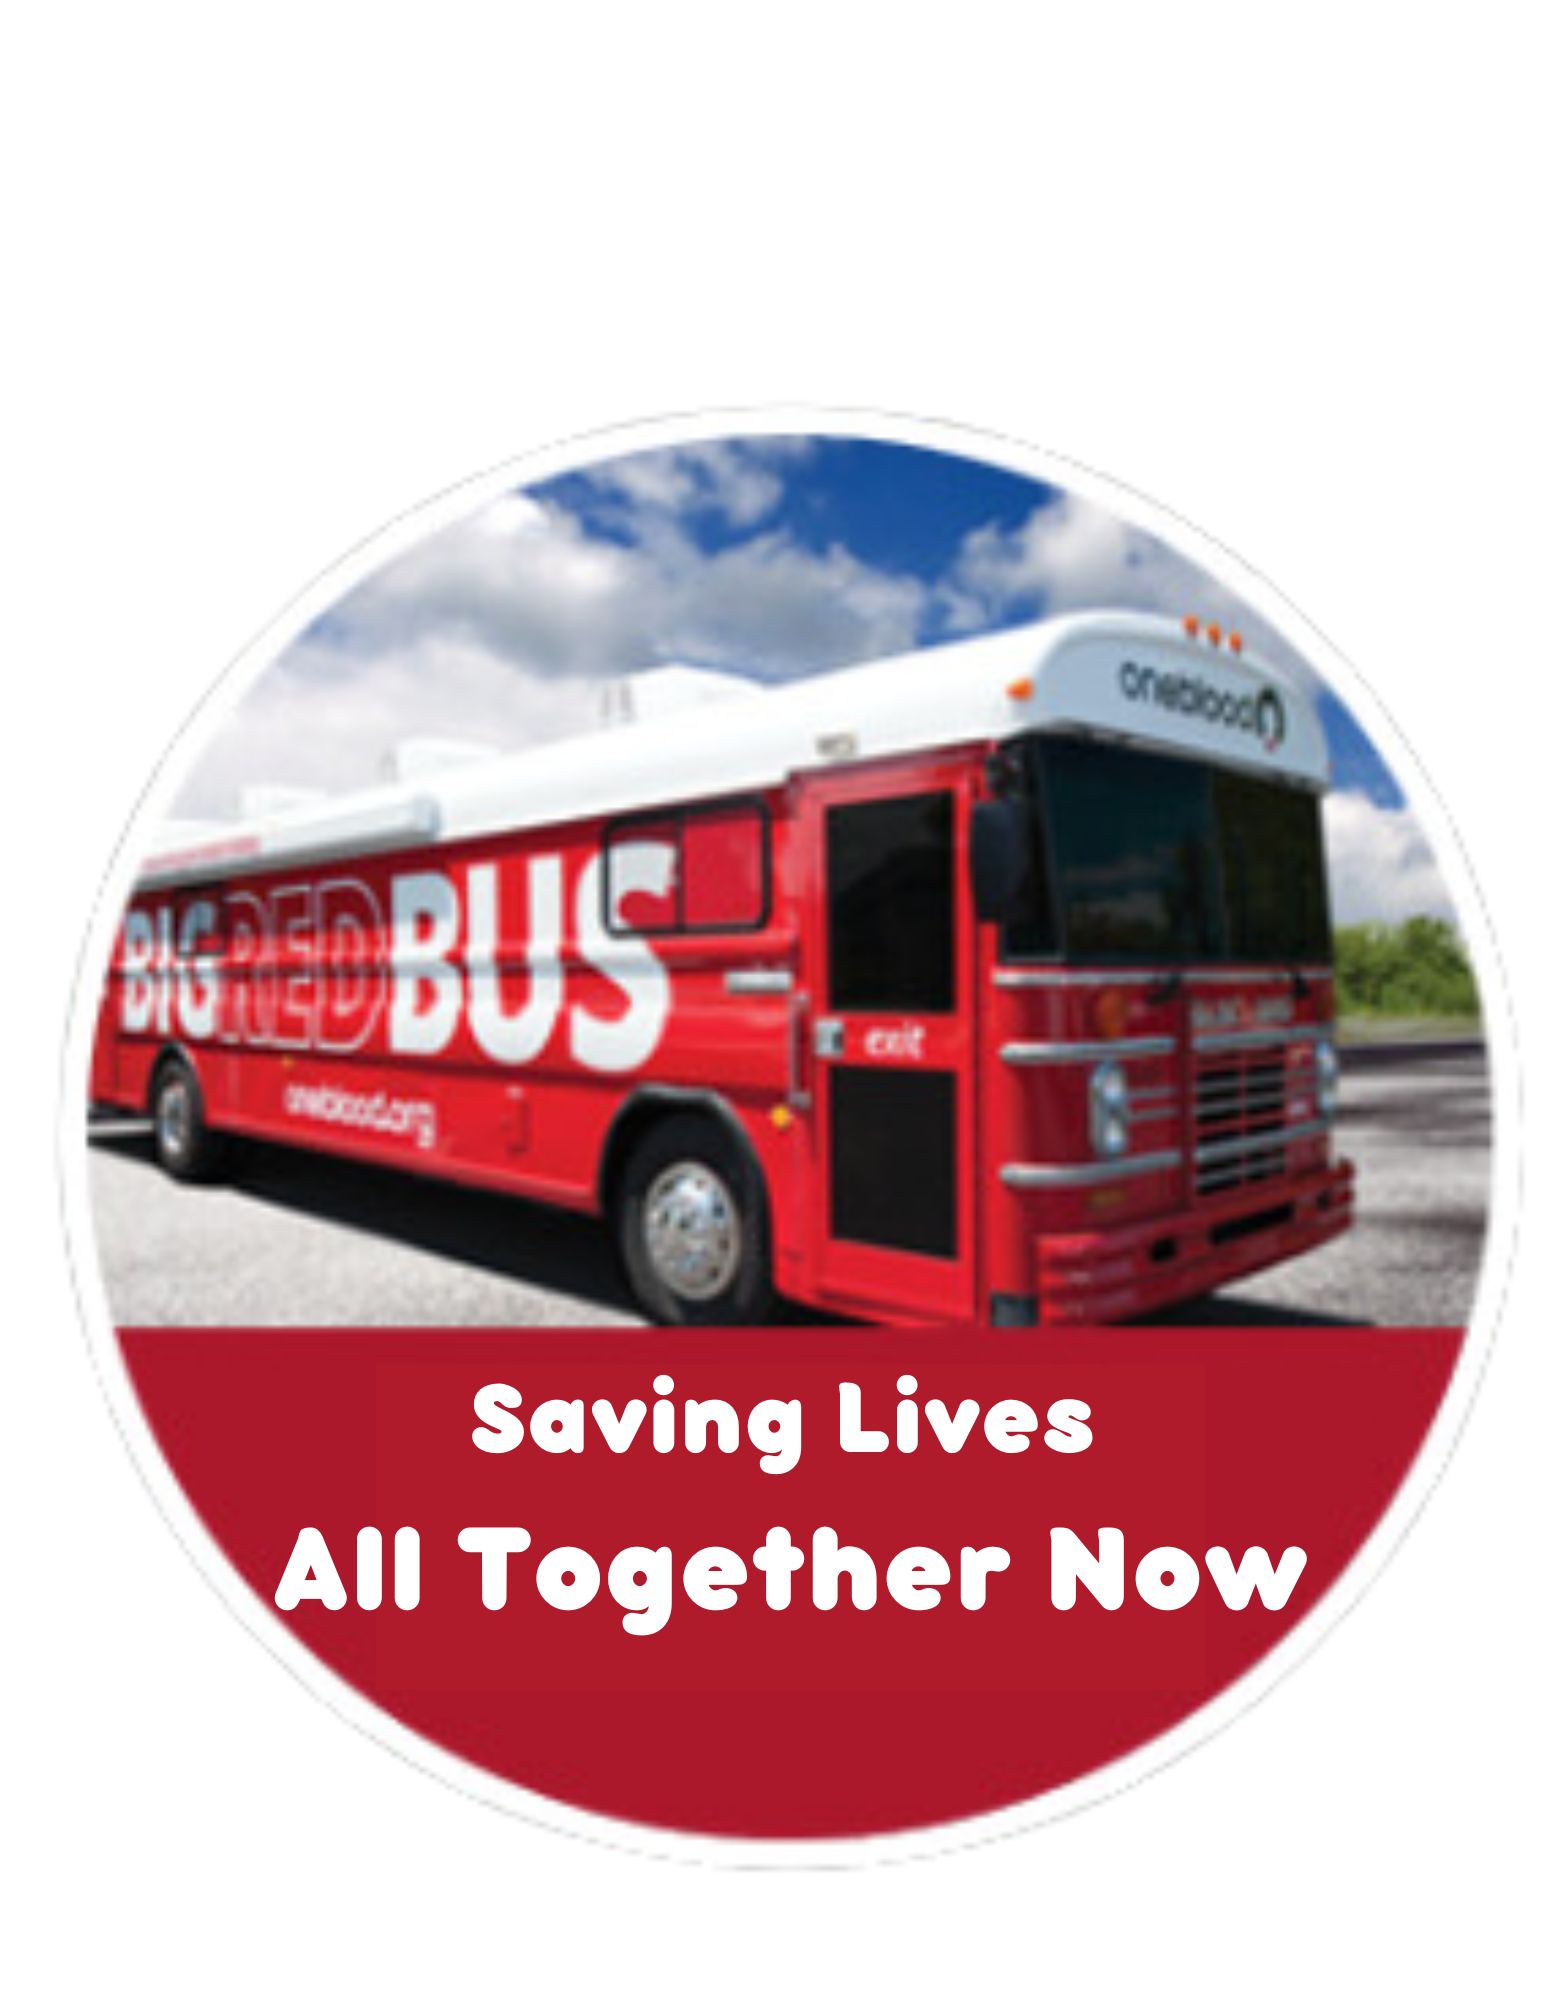 One Blood big red bus with the words Saving LIves All Together Now